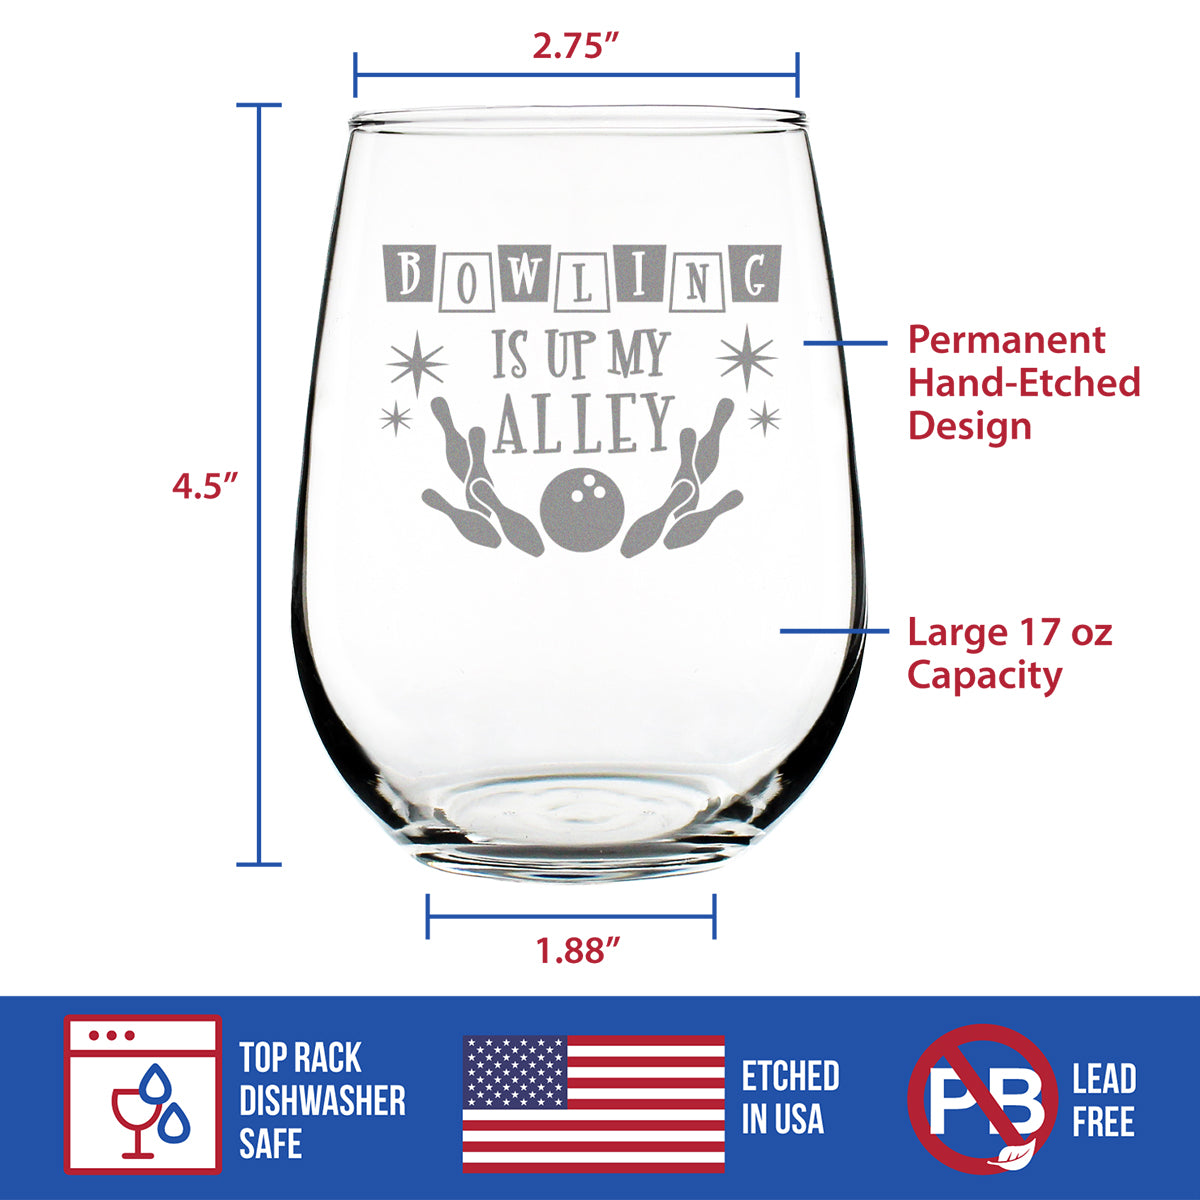 Bowling Is Up My Alley - Stemless Wine Glass - Funny Bowling Themed Gifts and Decor for Bowlers - Large 17 Oz Glass